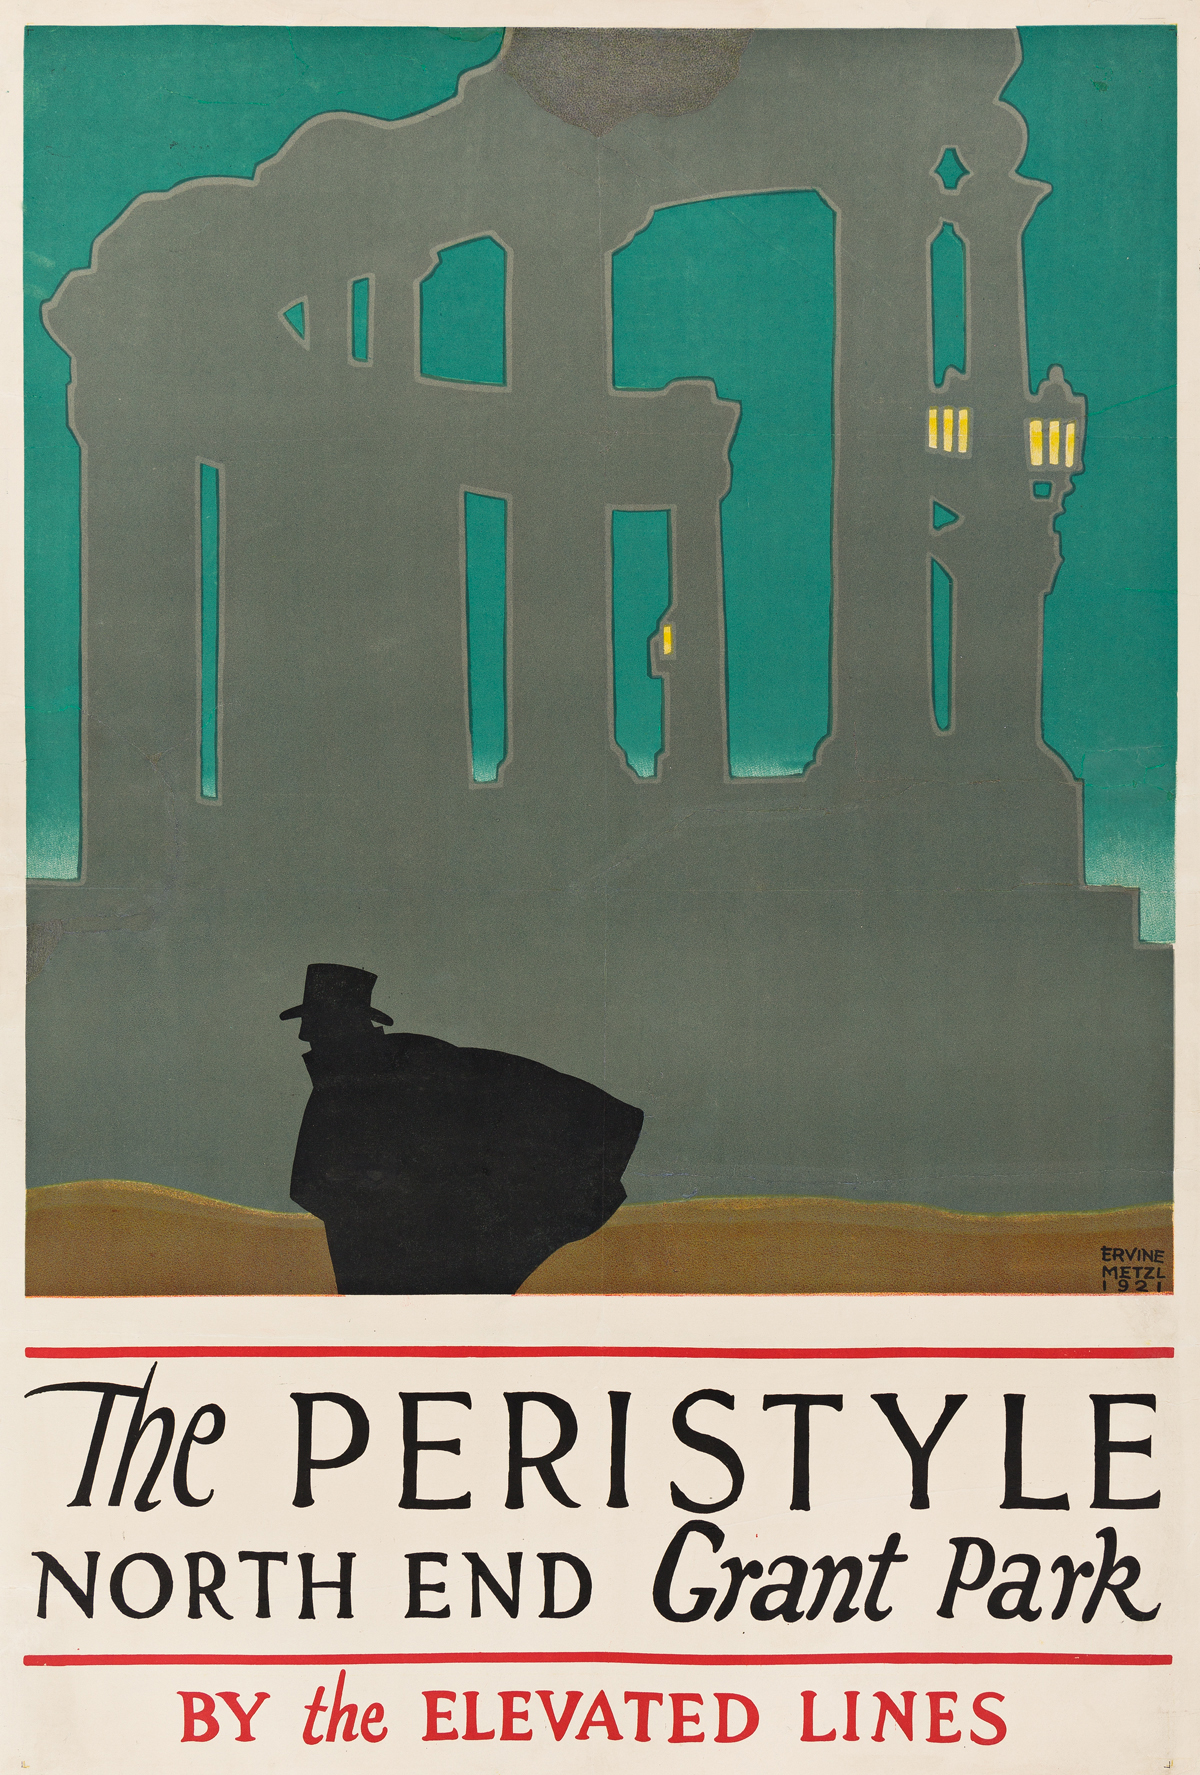 Ervine Metzl (1899-1963).  THE PERISTYLE / NORTH END GRANT PARK / BY THE ELEVATED LINES. 1921.